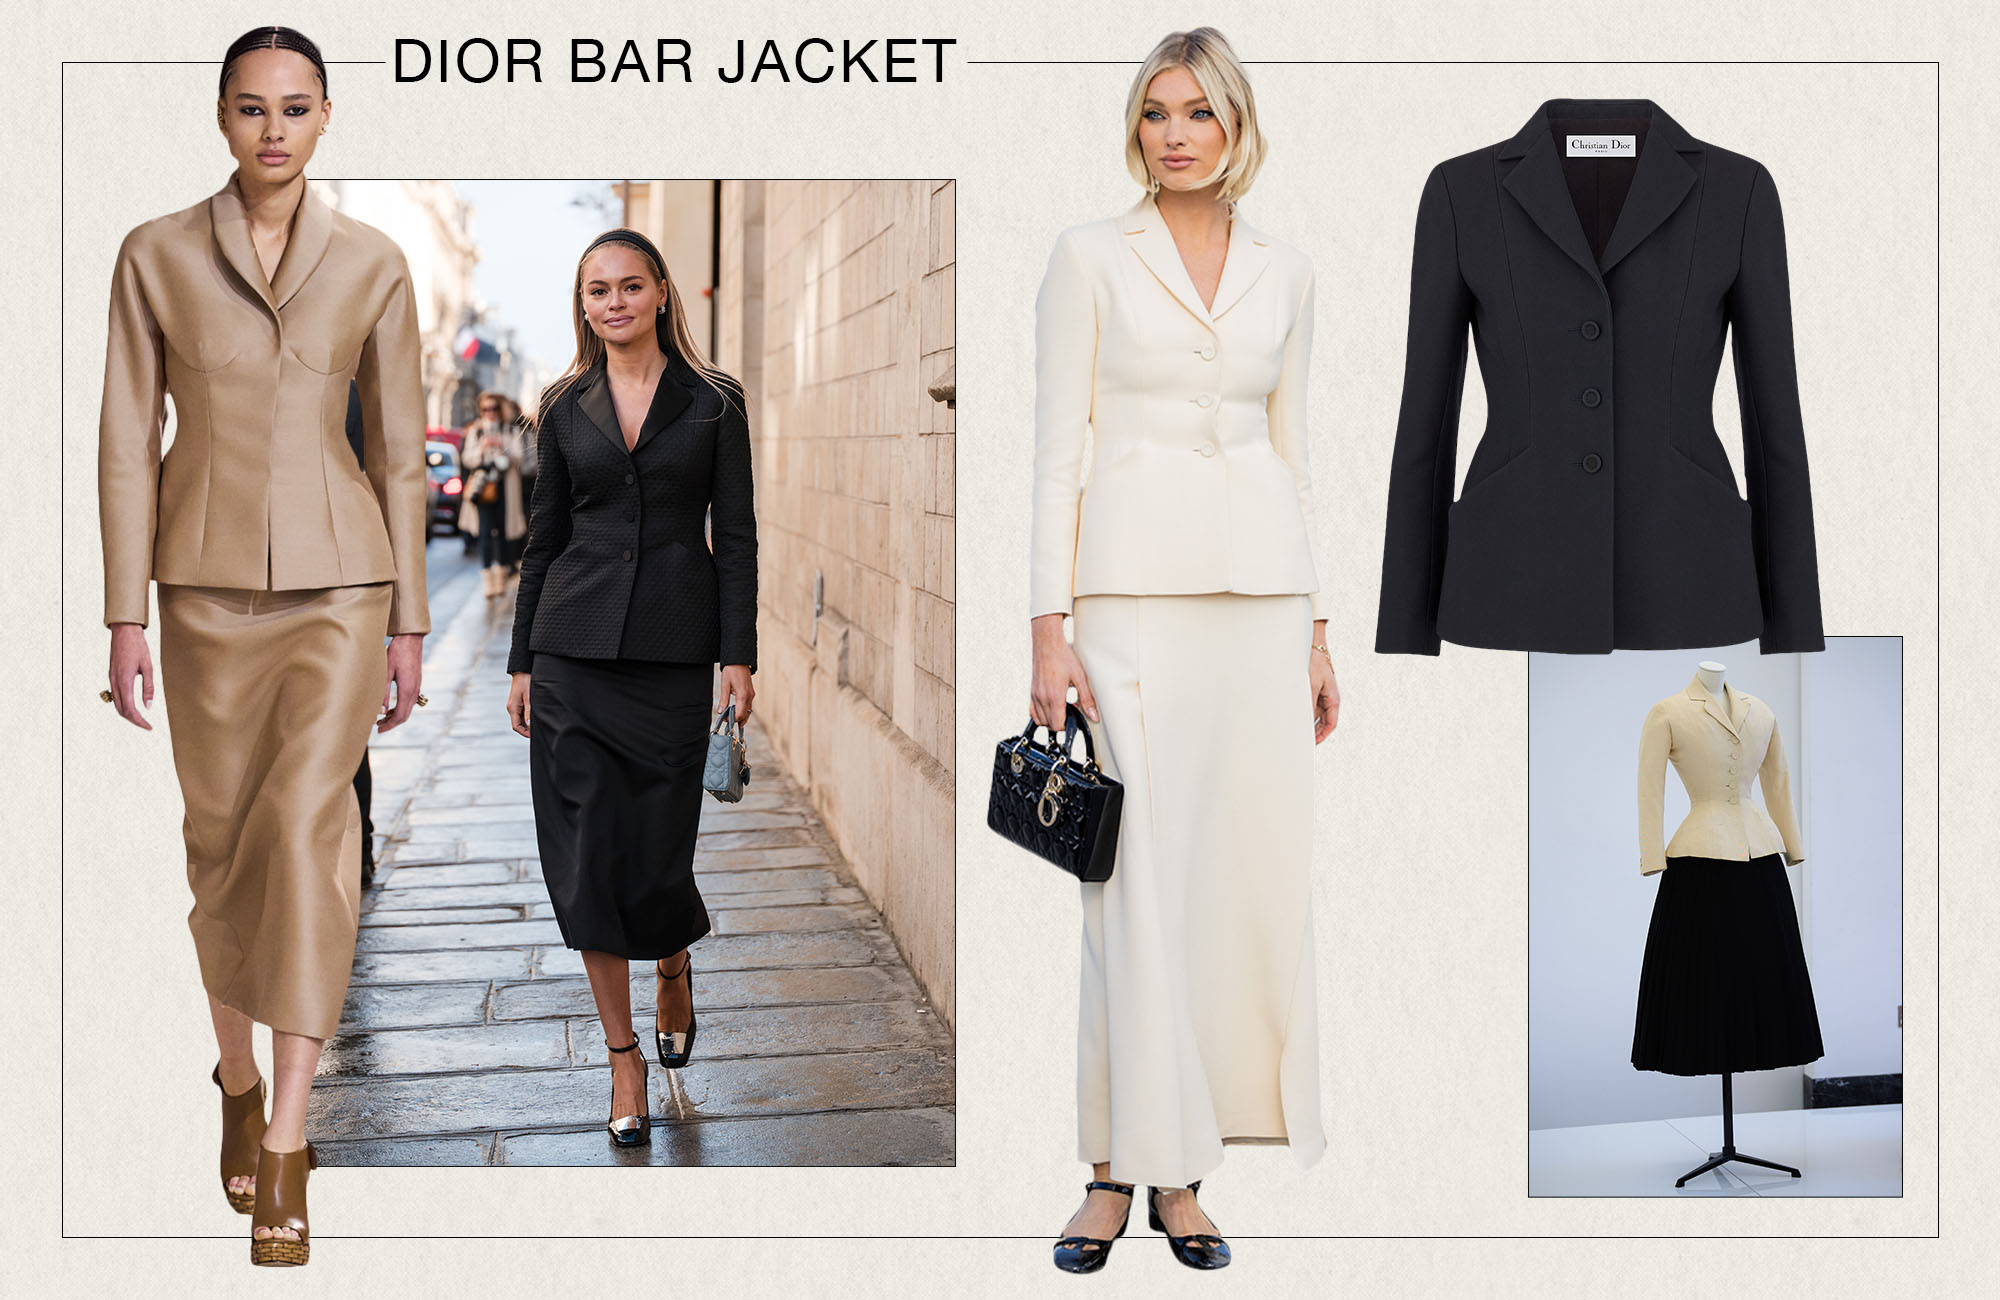 A collage of images of Dior Bar jackets, from the runways, street style, etc.